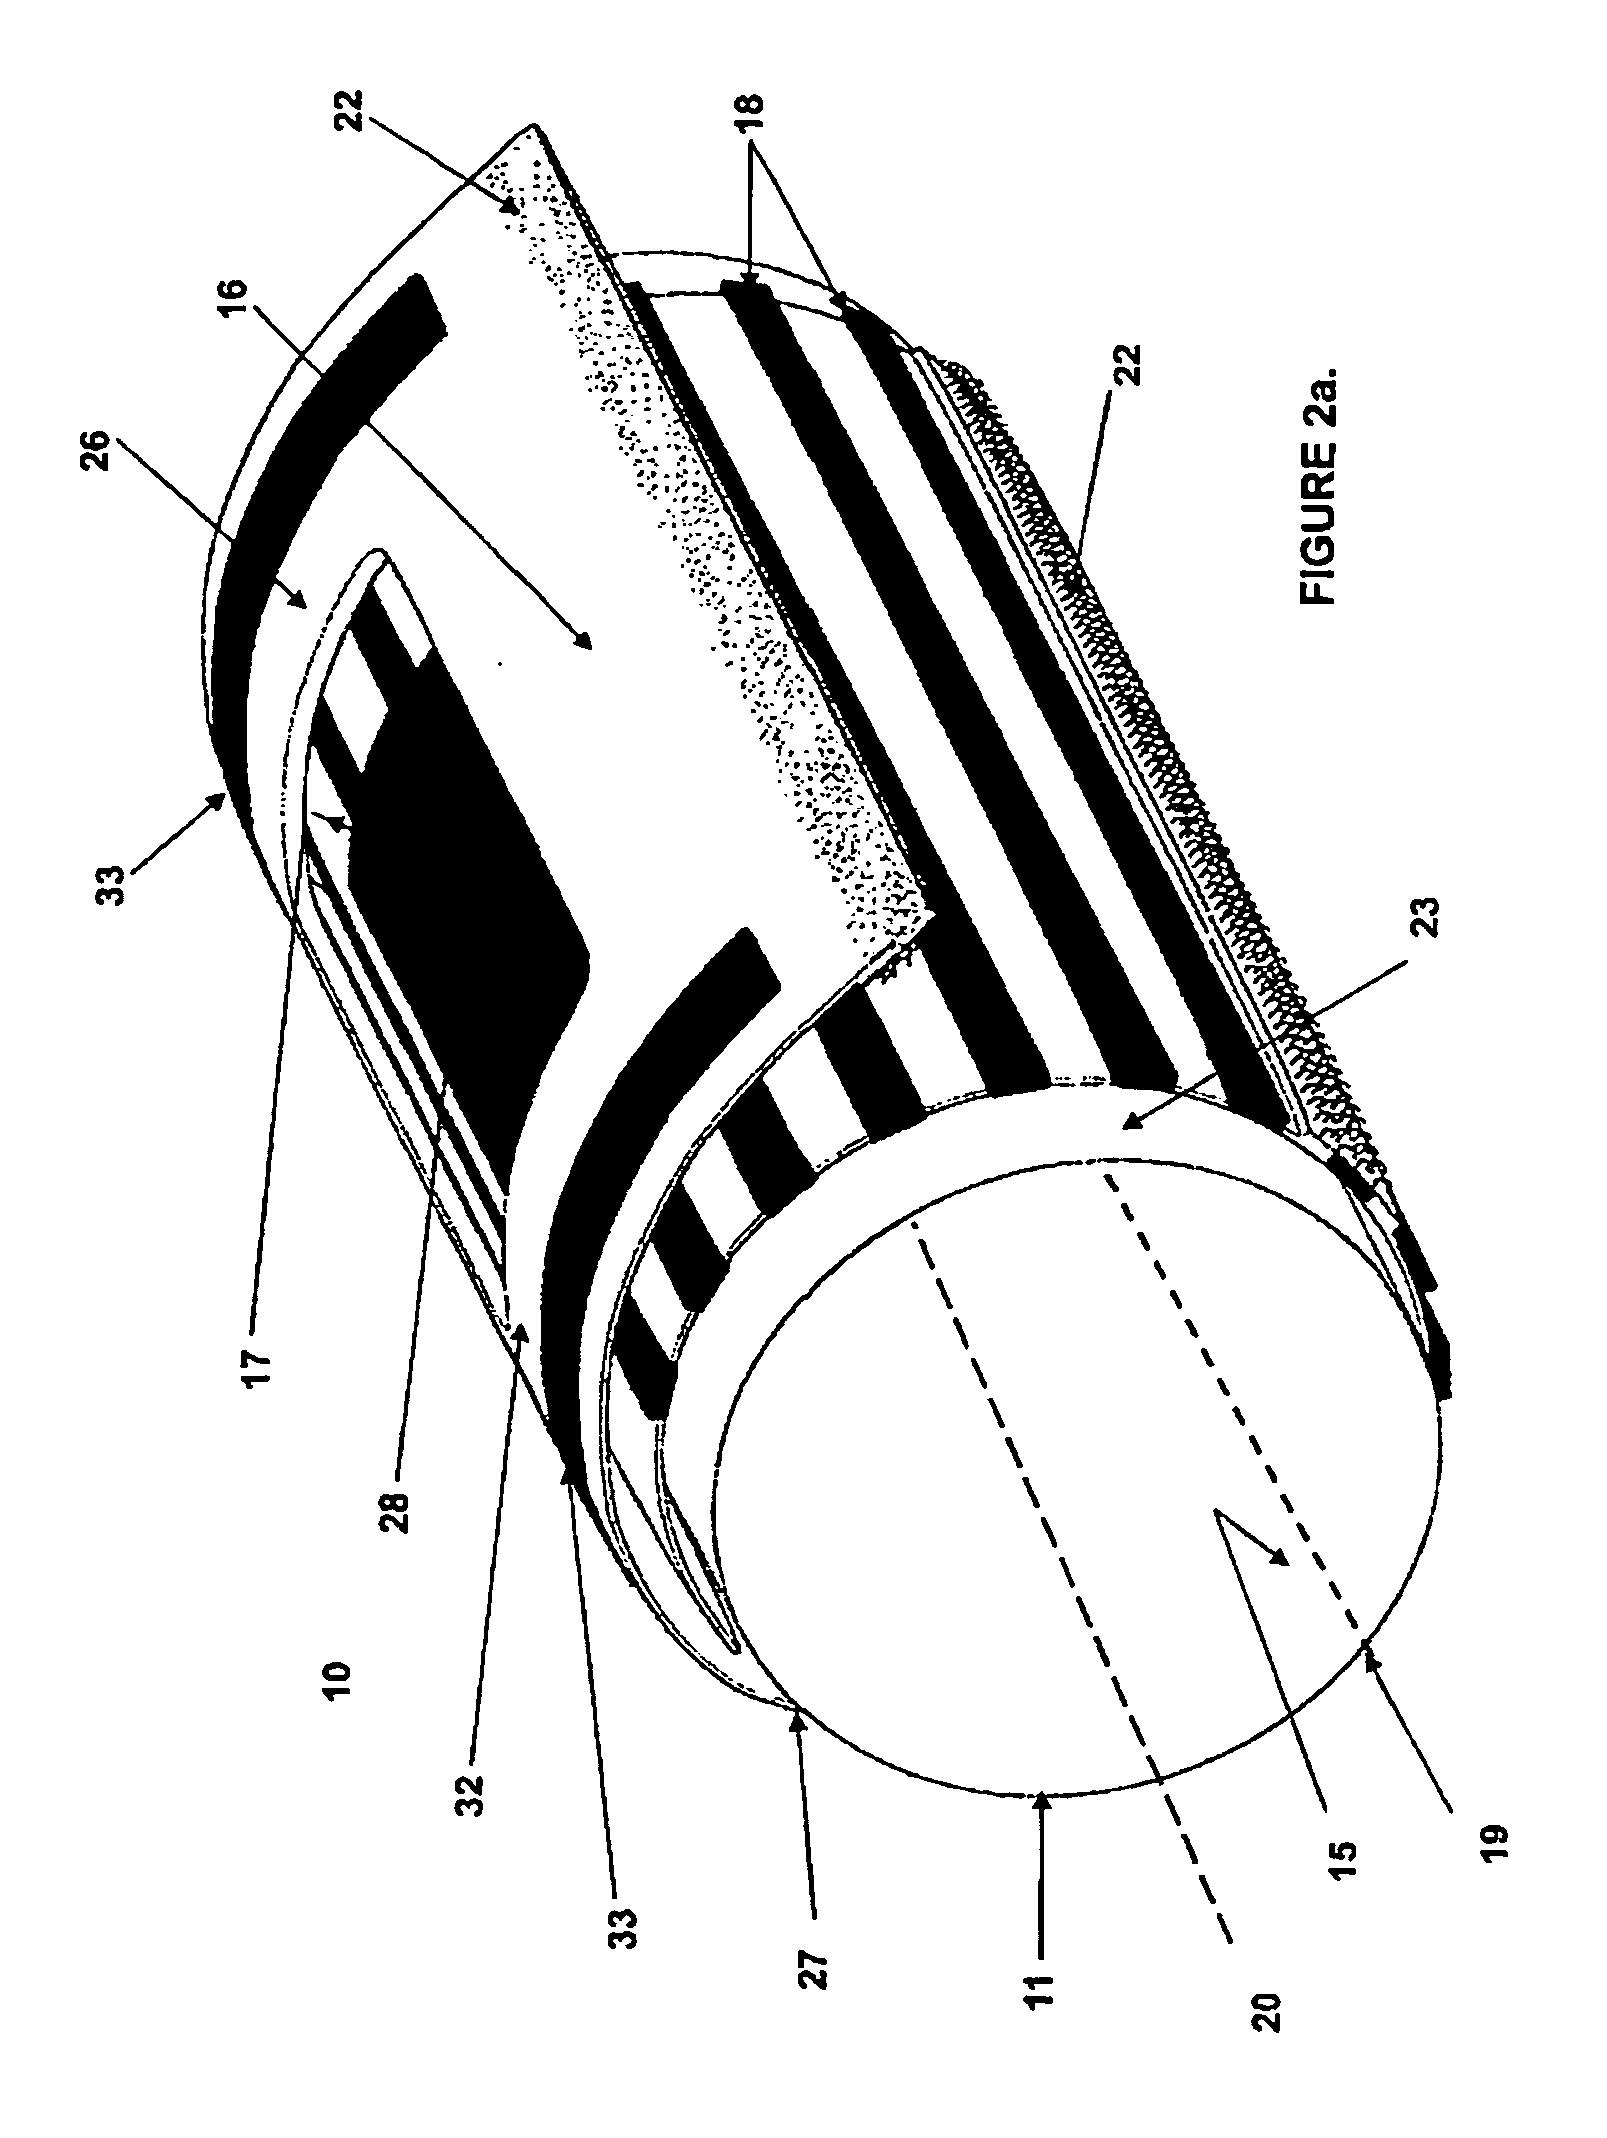 Normothermic maintenance system and method